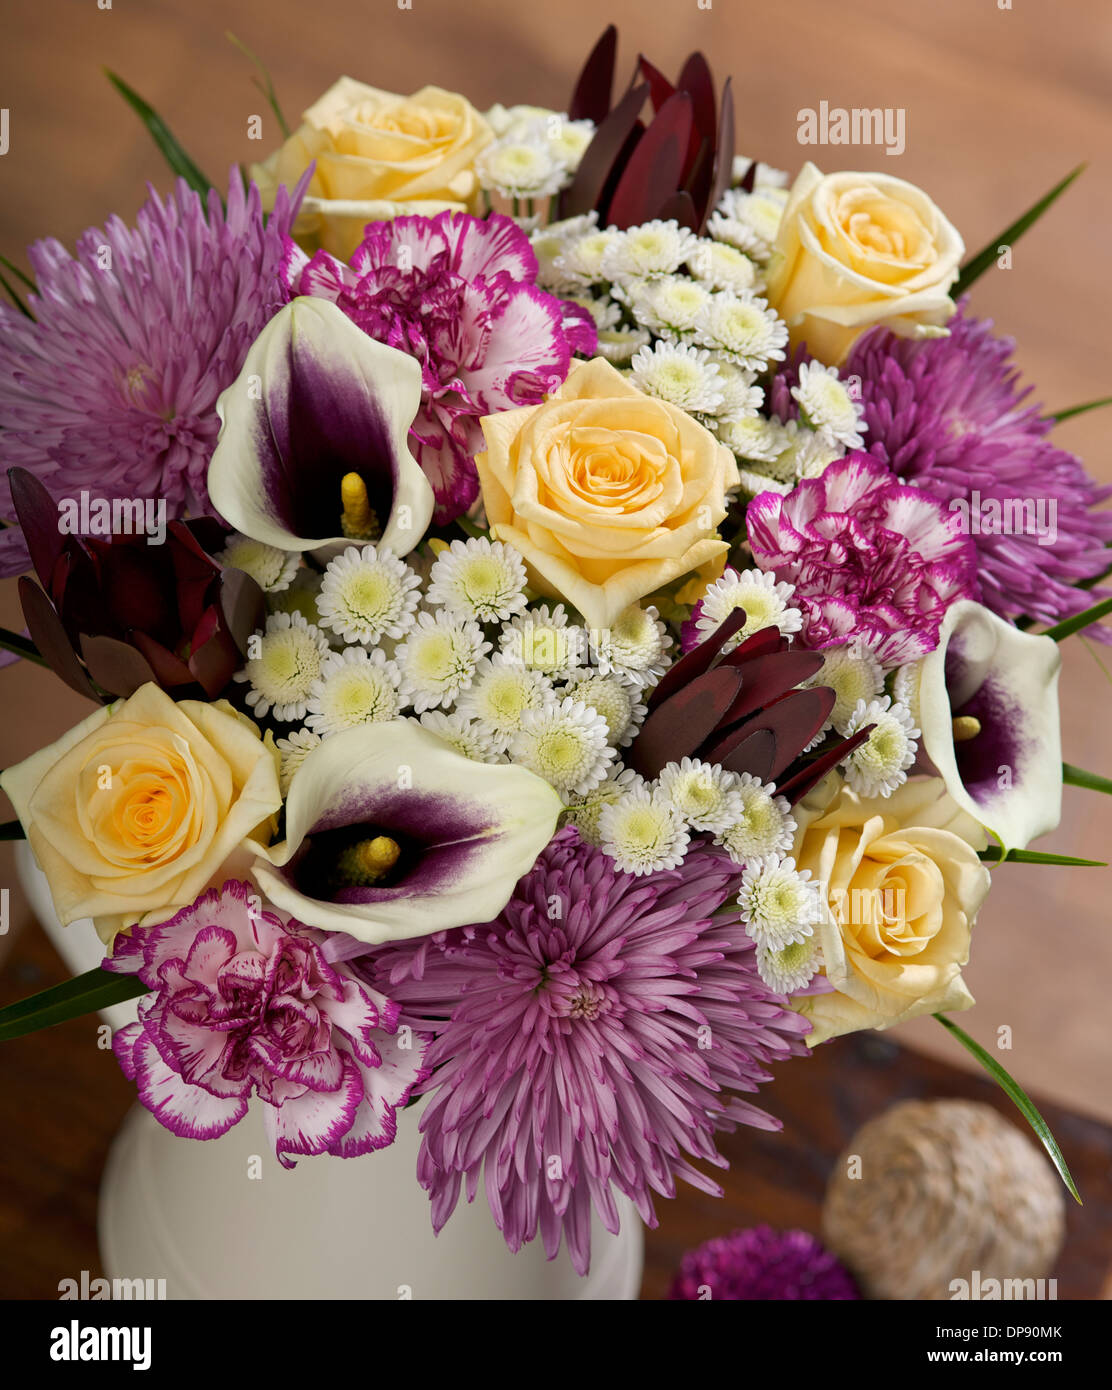 white Stallion Chrysanthemums, purple edged spray Carnations, maroon Leucadendron, purple Calla Lilies and Avalanche Roses in a vase in a home setting Stock Photo